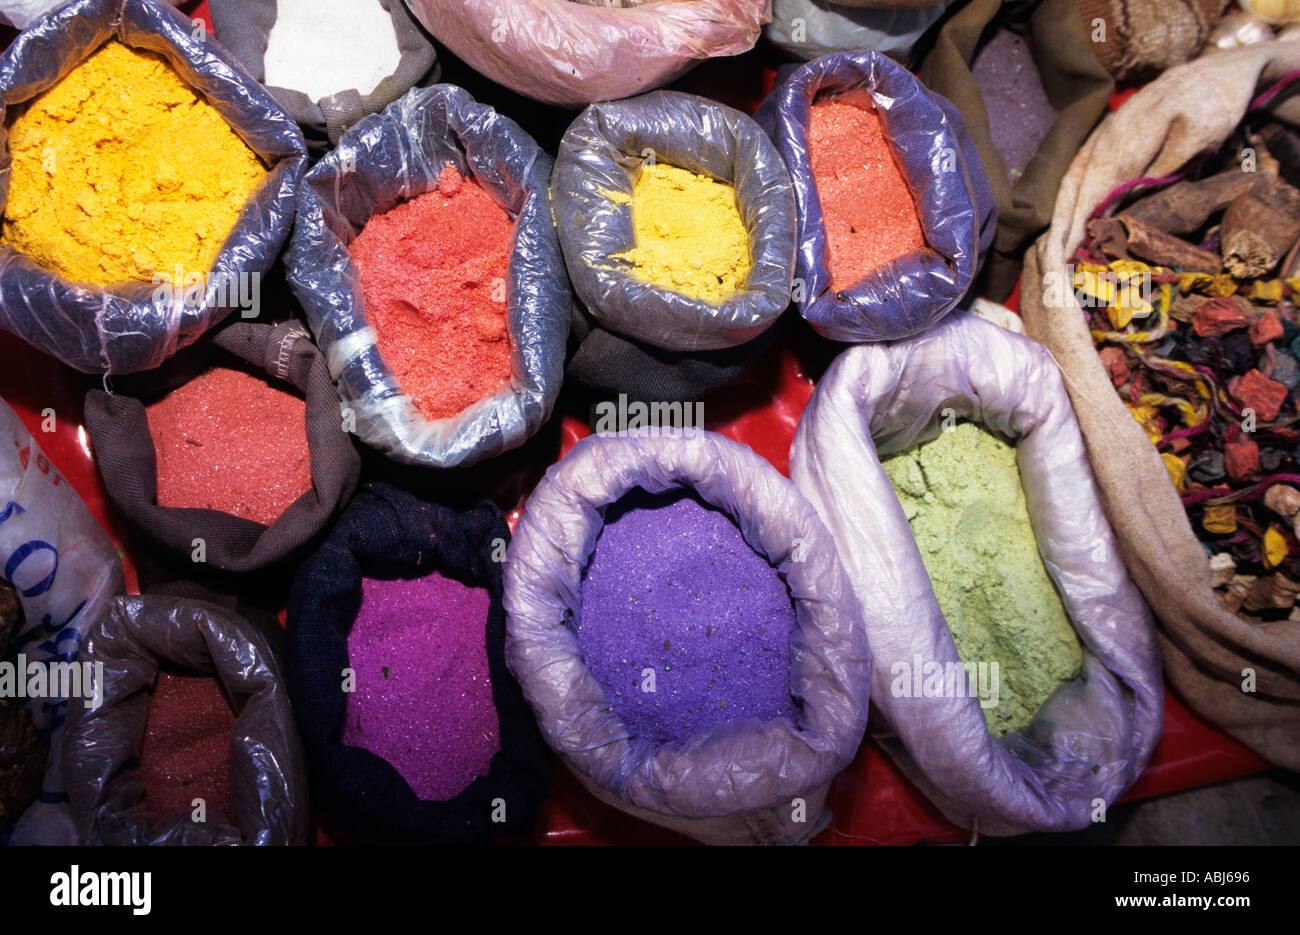 Pisac, Peru. Bags of powdered dyes on sale at the market; used for traditional woven fabrics. Stock Photo